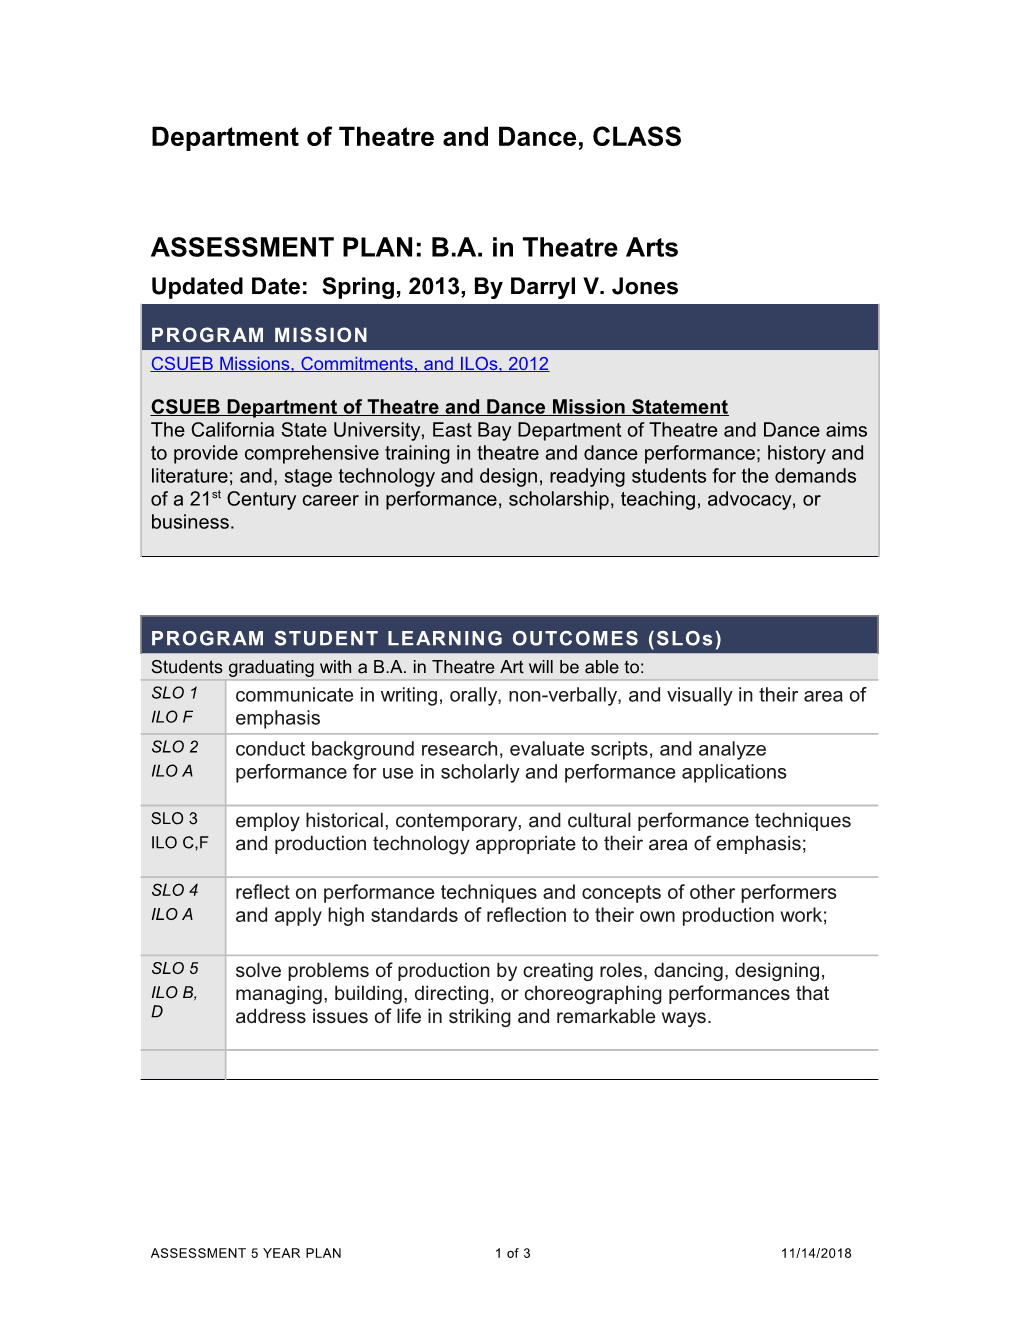 ASSESSMENT PLAN: B.A. in Theatre Arts